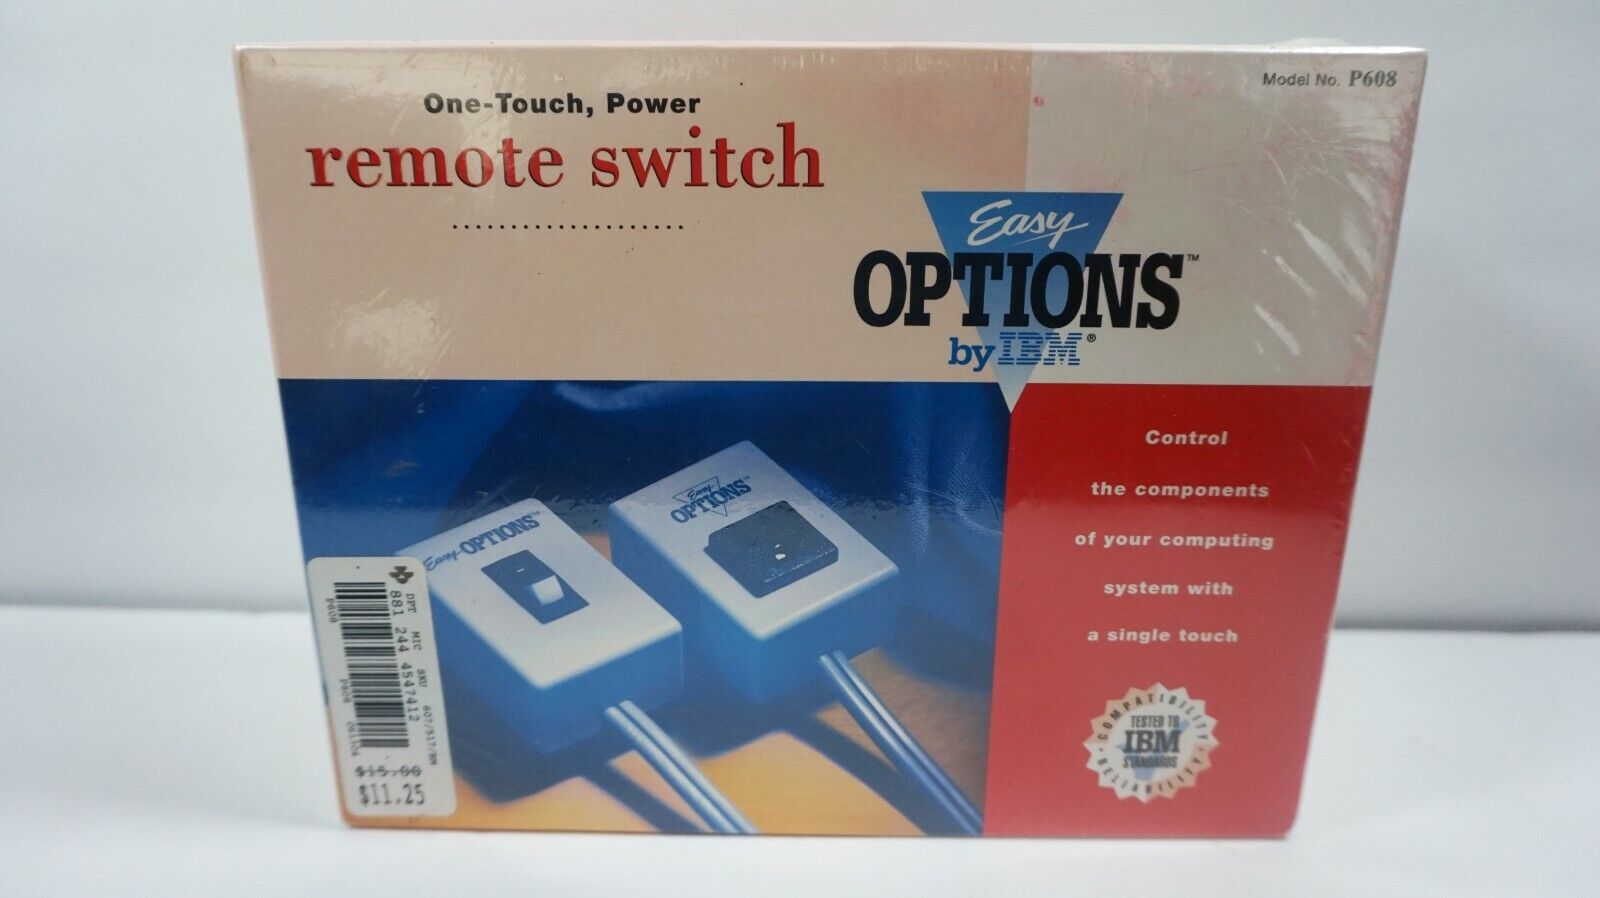 IBM Easy options one touch power remote switch model P608 - New in box NIB